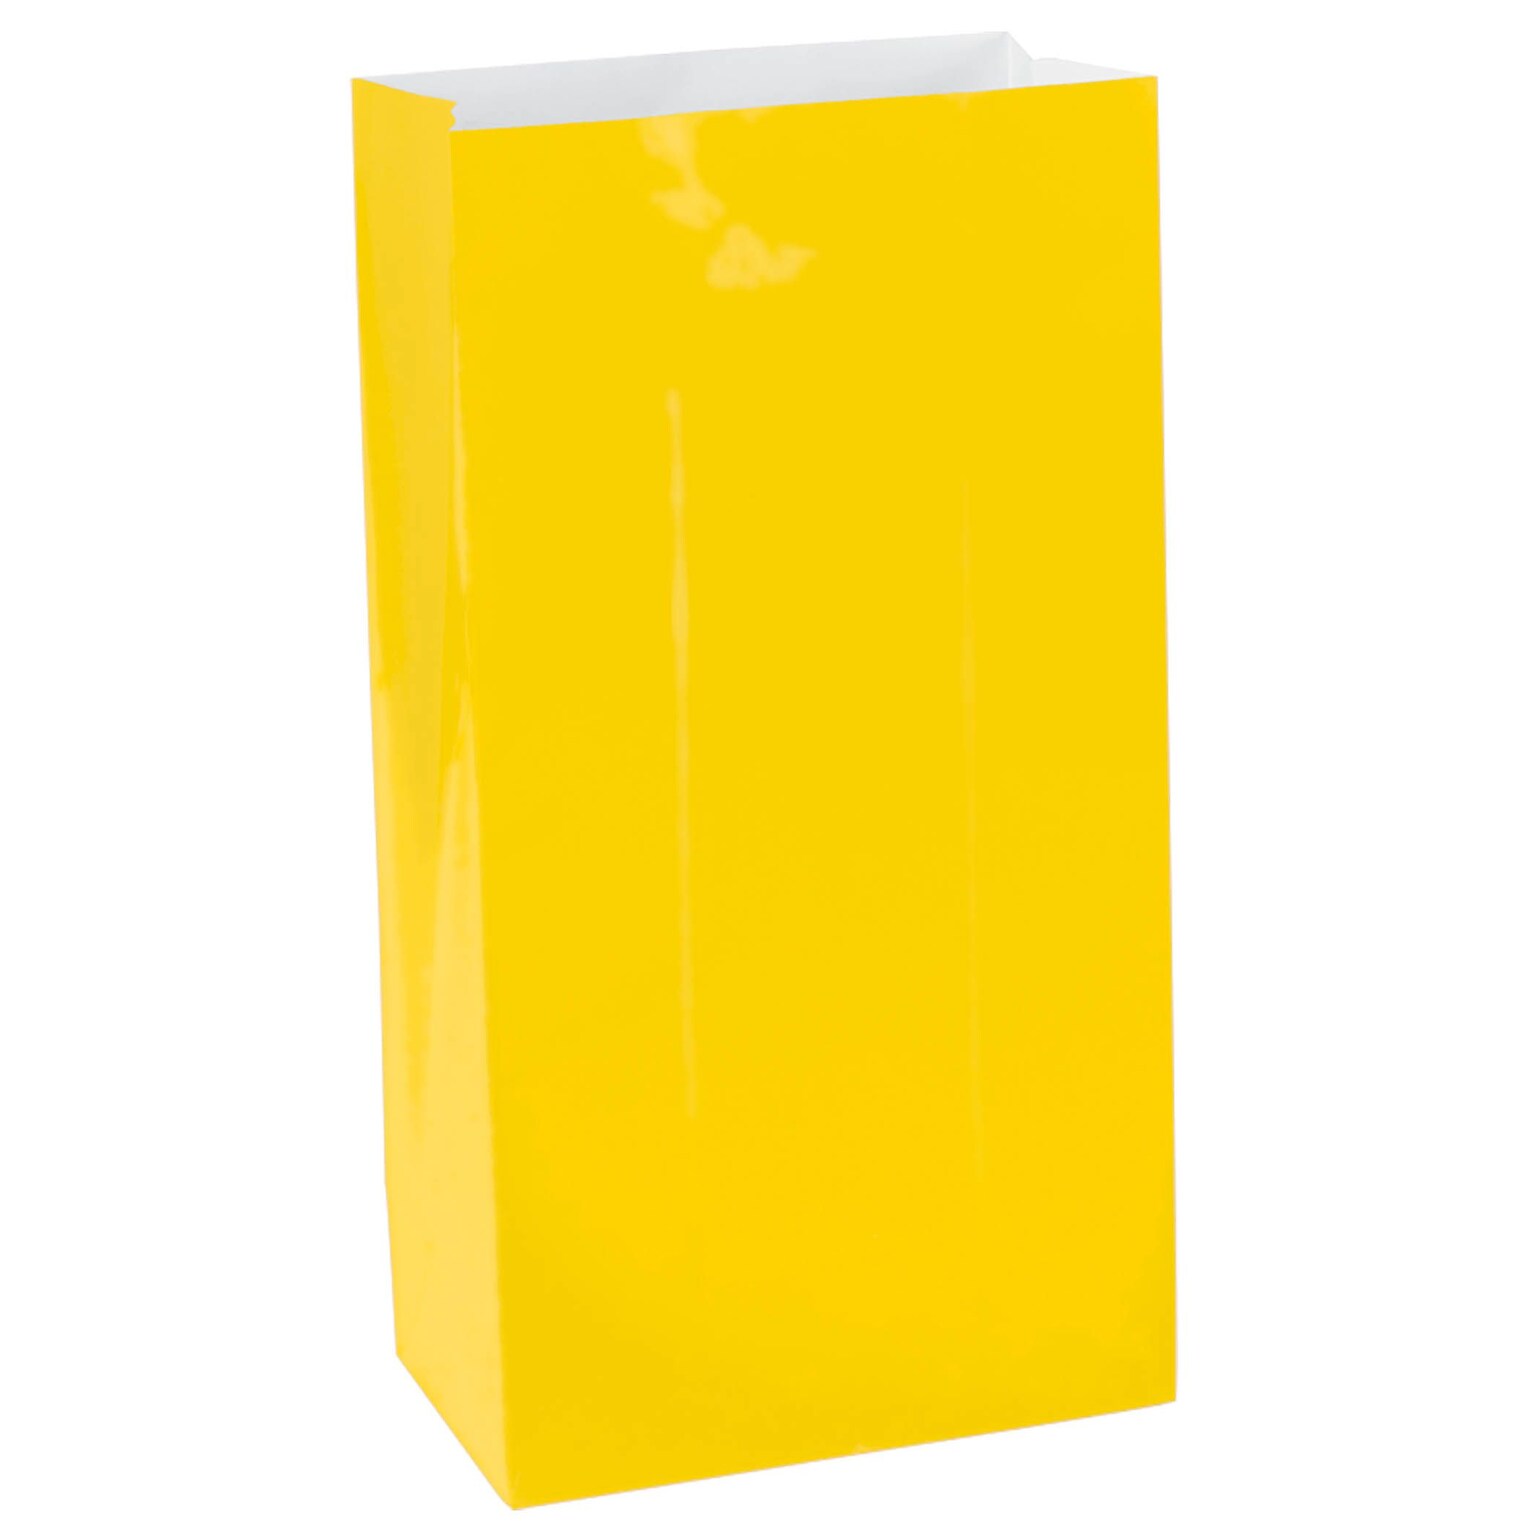 Amscan Paper Party Bag, 6.5 x 3, Sunshine Yellow, 9/Pack, 12 Bags/Pack (370202.09)